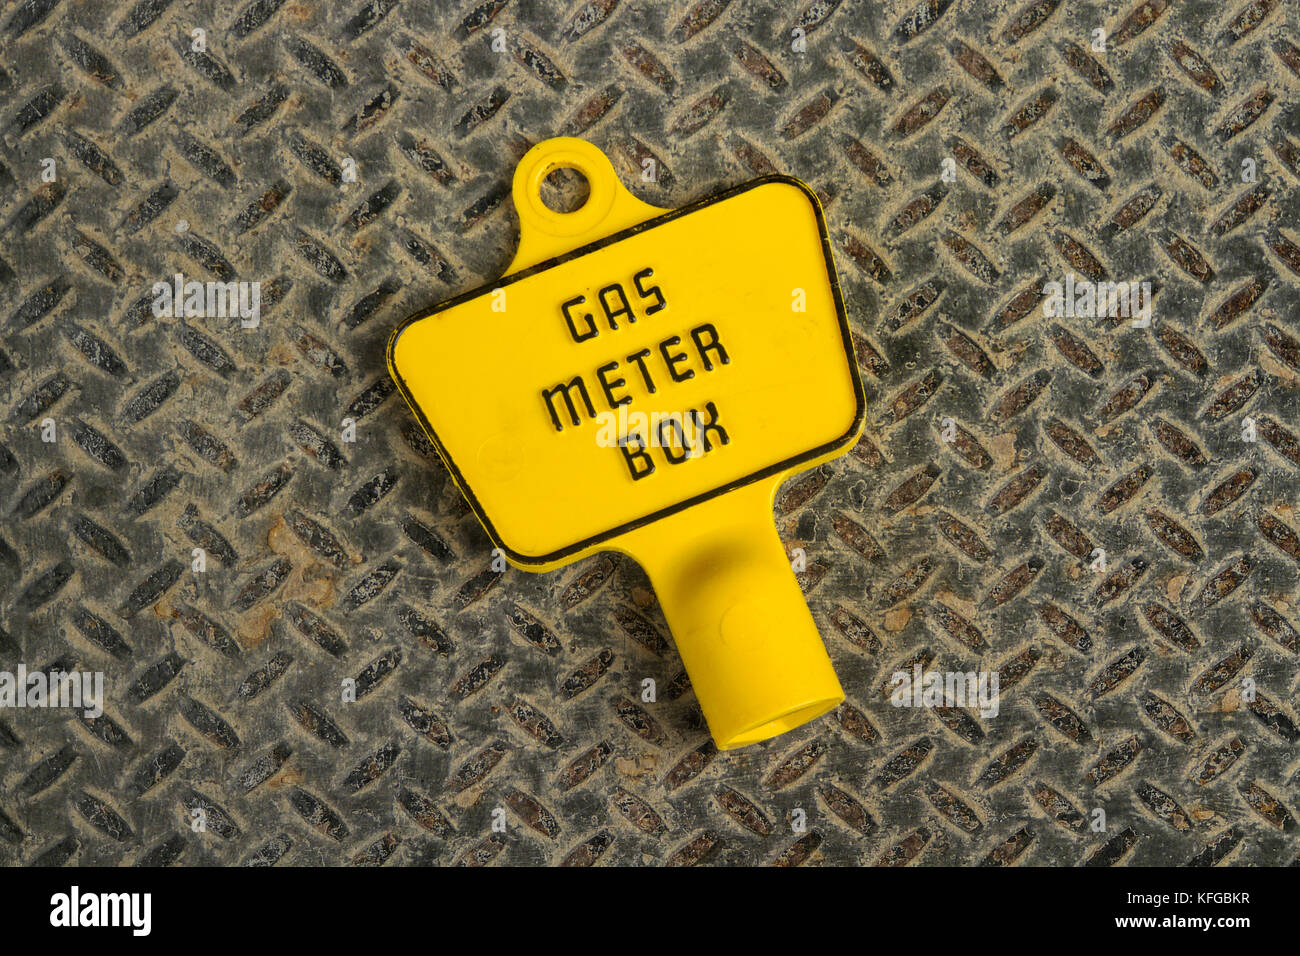 Plastic key for an exterior gas meter box on a metal background Stock Photo